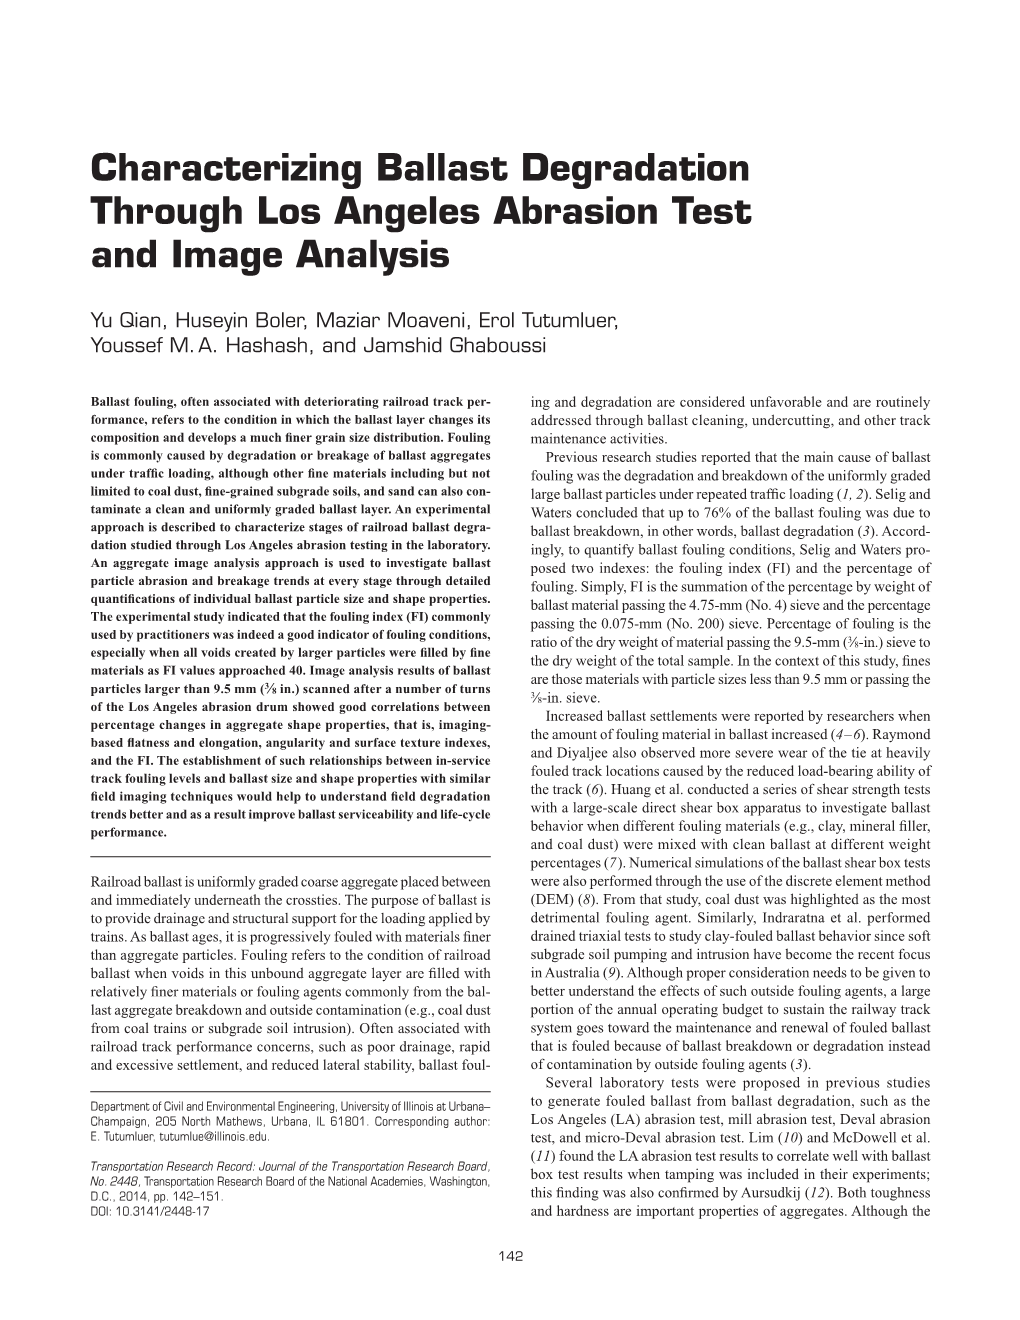 Characterizing Ballast Degradation Through Los Angeles Abrasion Test and Image Analysis